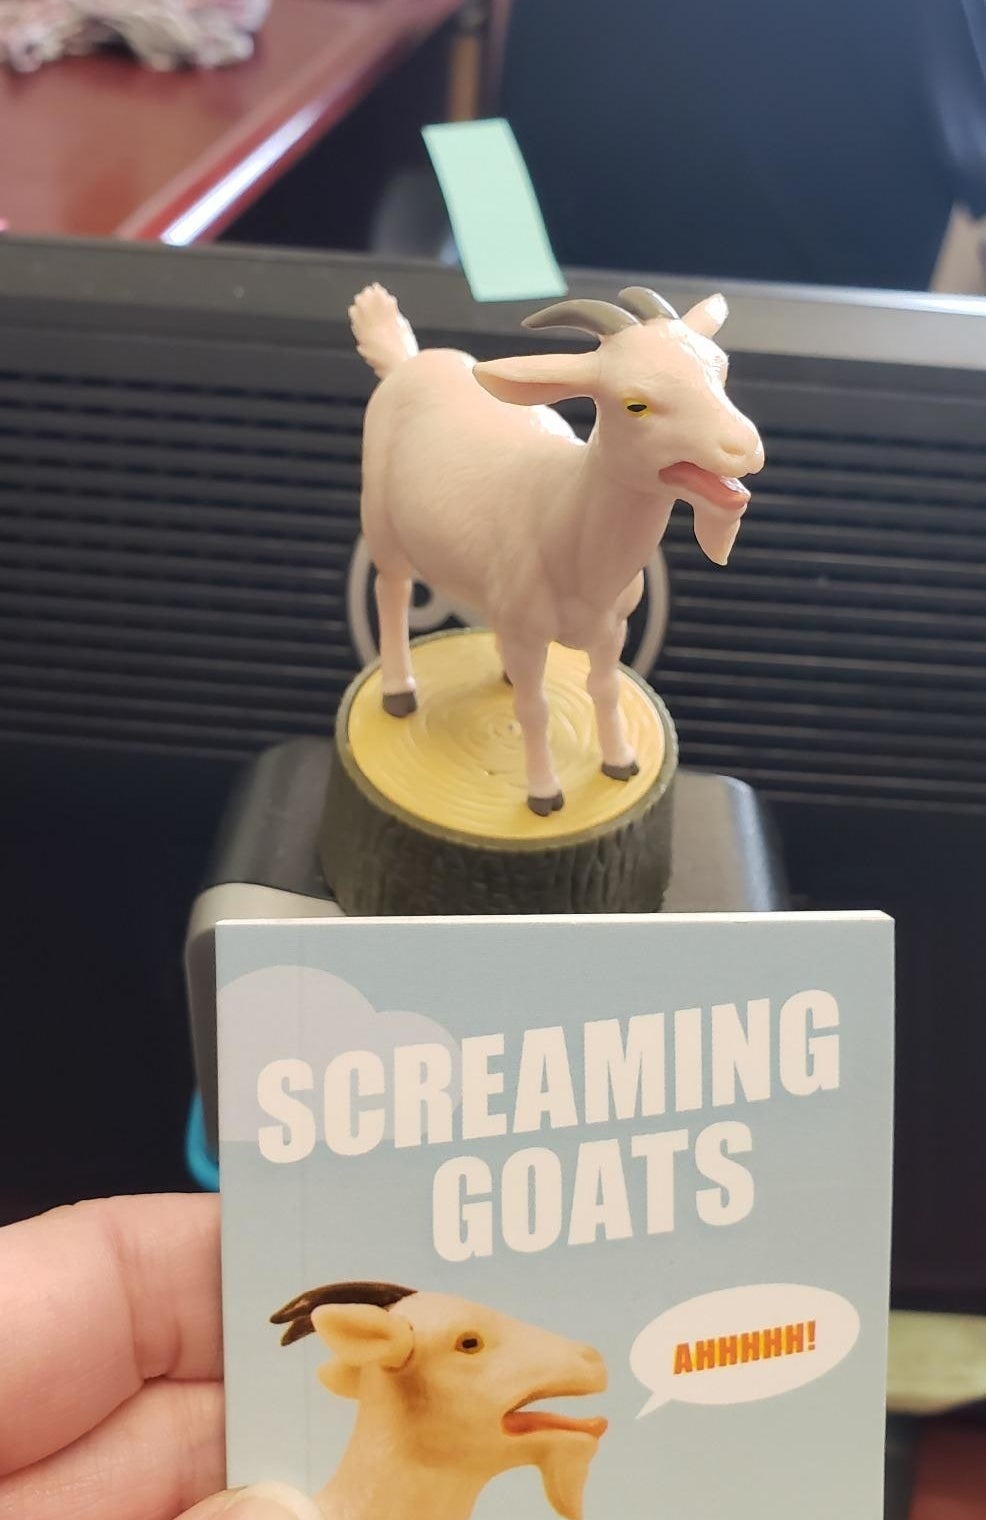 The small goat figurine and a close-up of the booklet